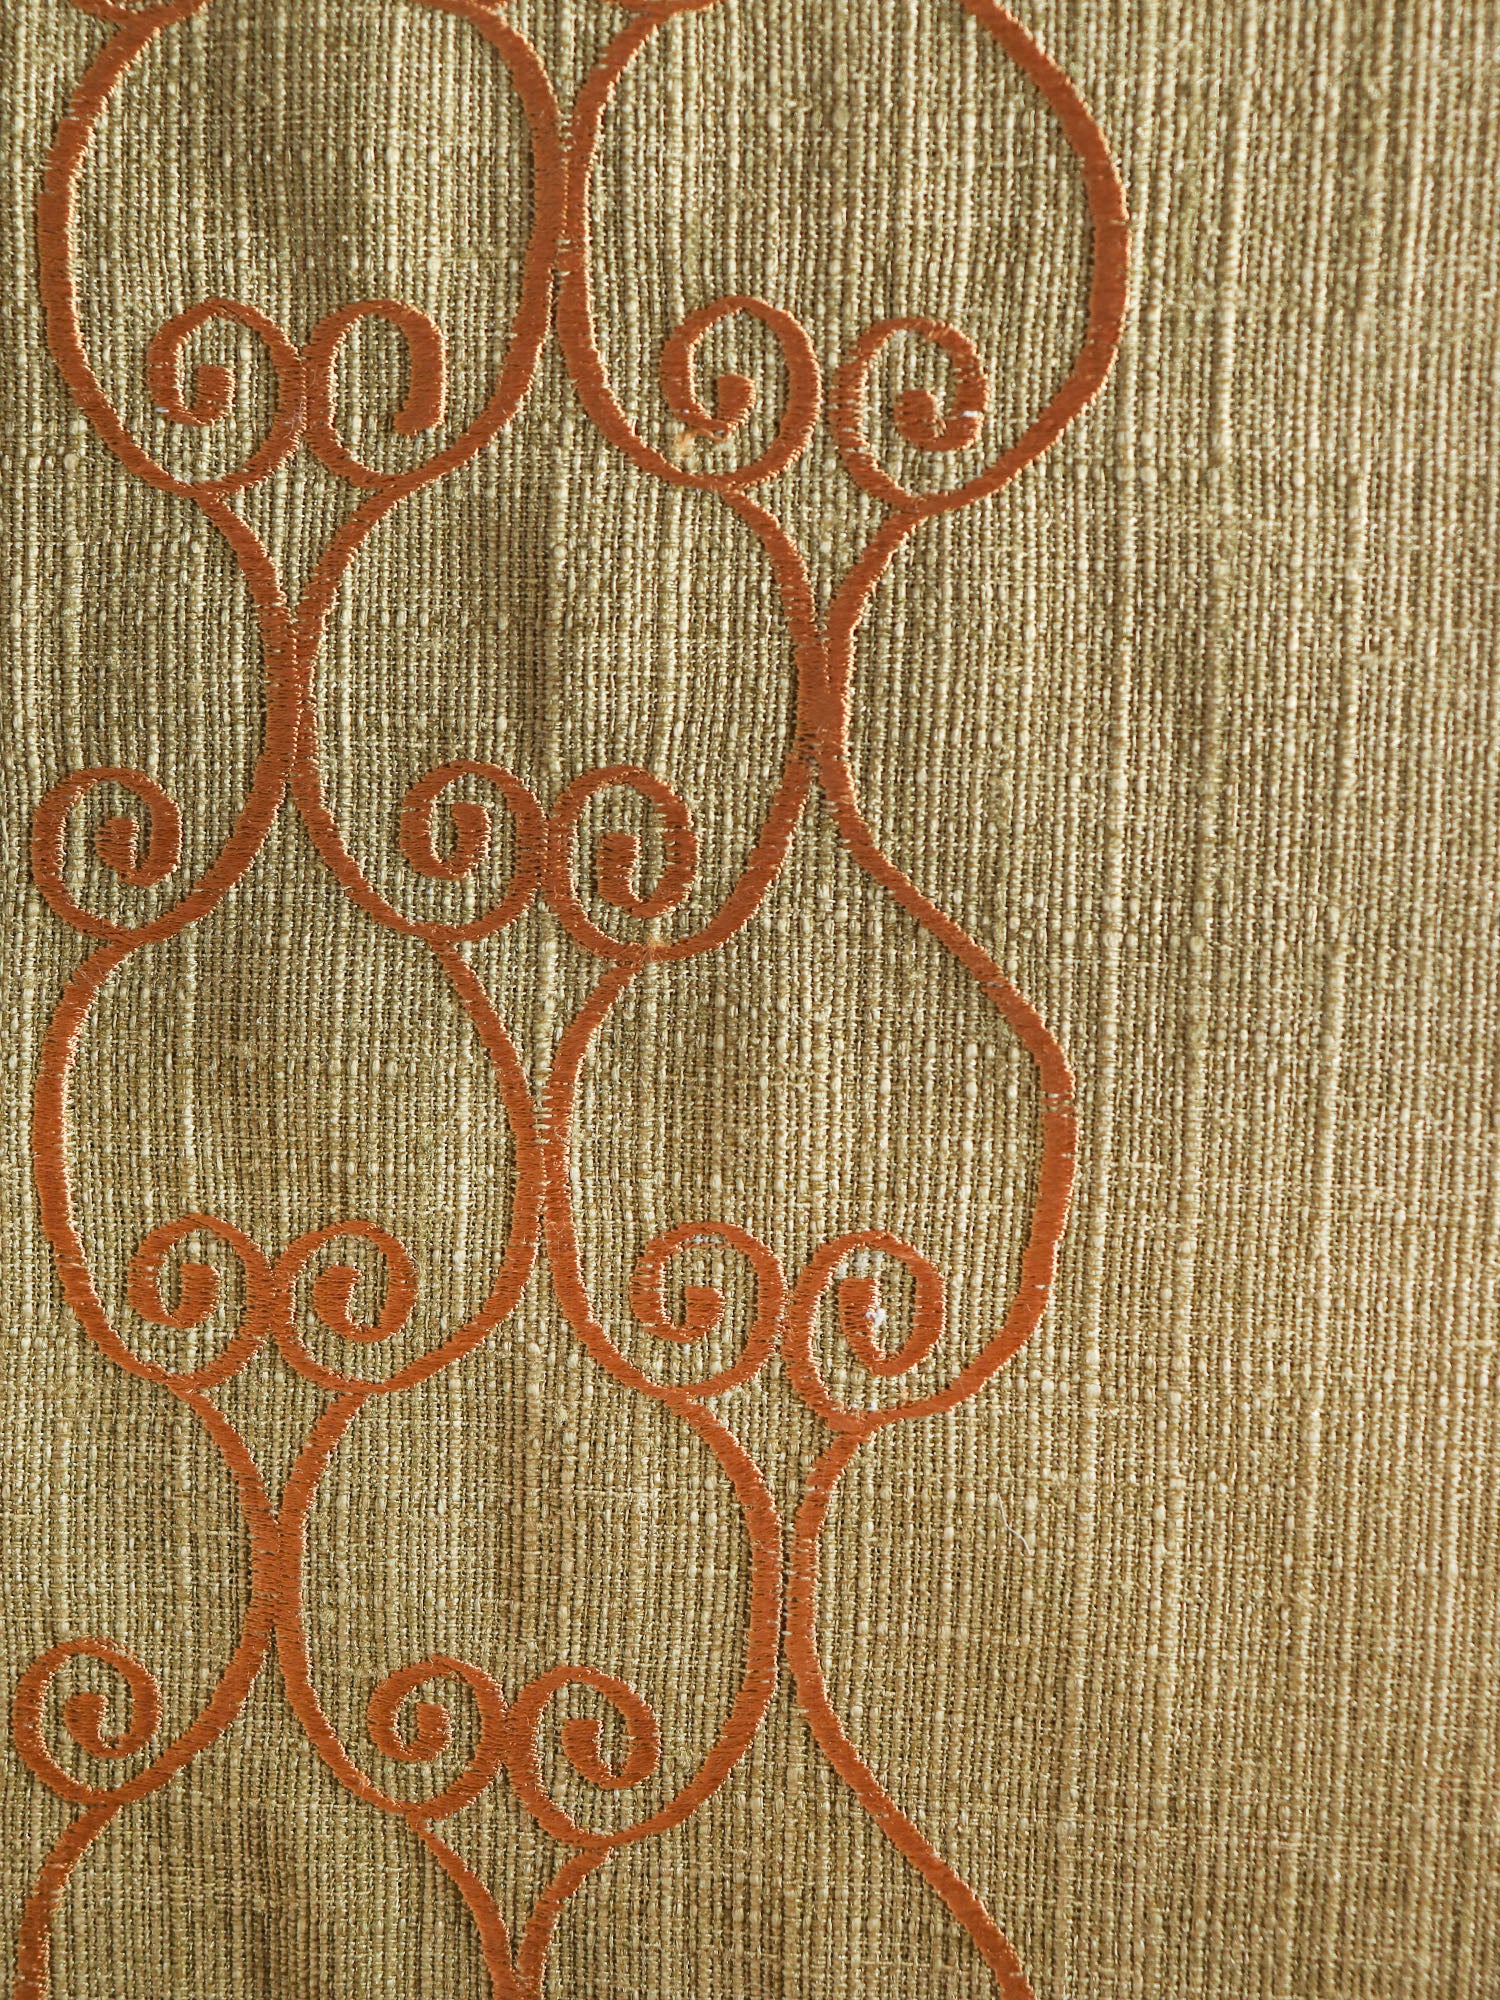 closeup of embroidered mats in sage green color - 13x19 inch